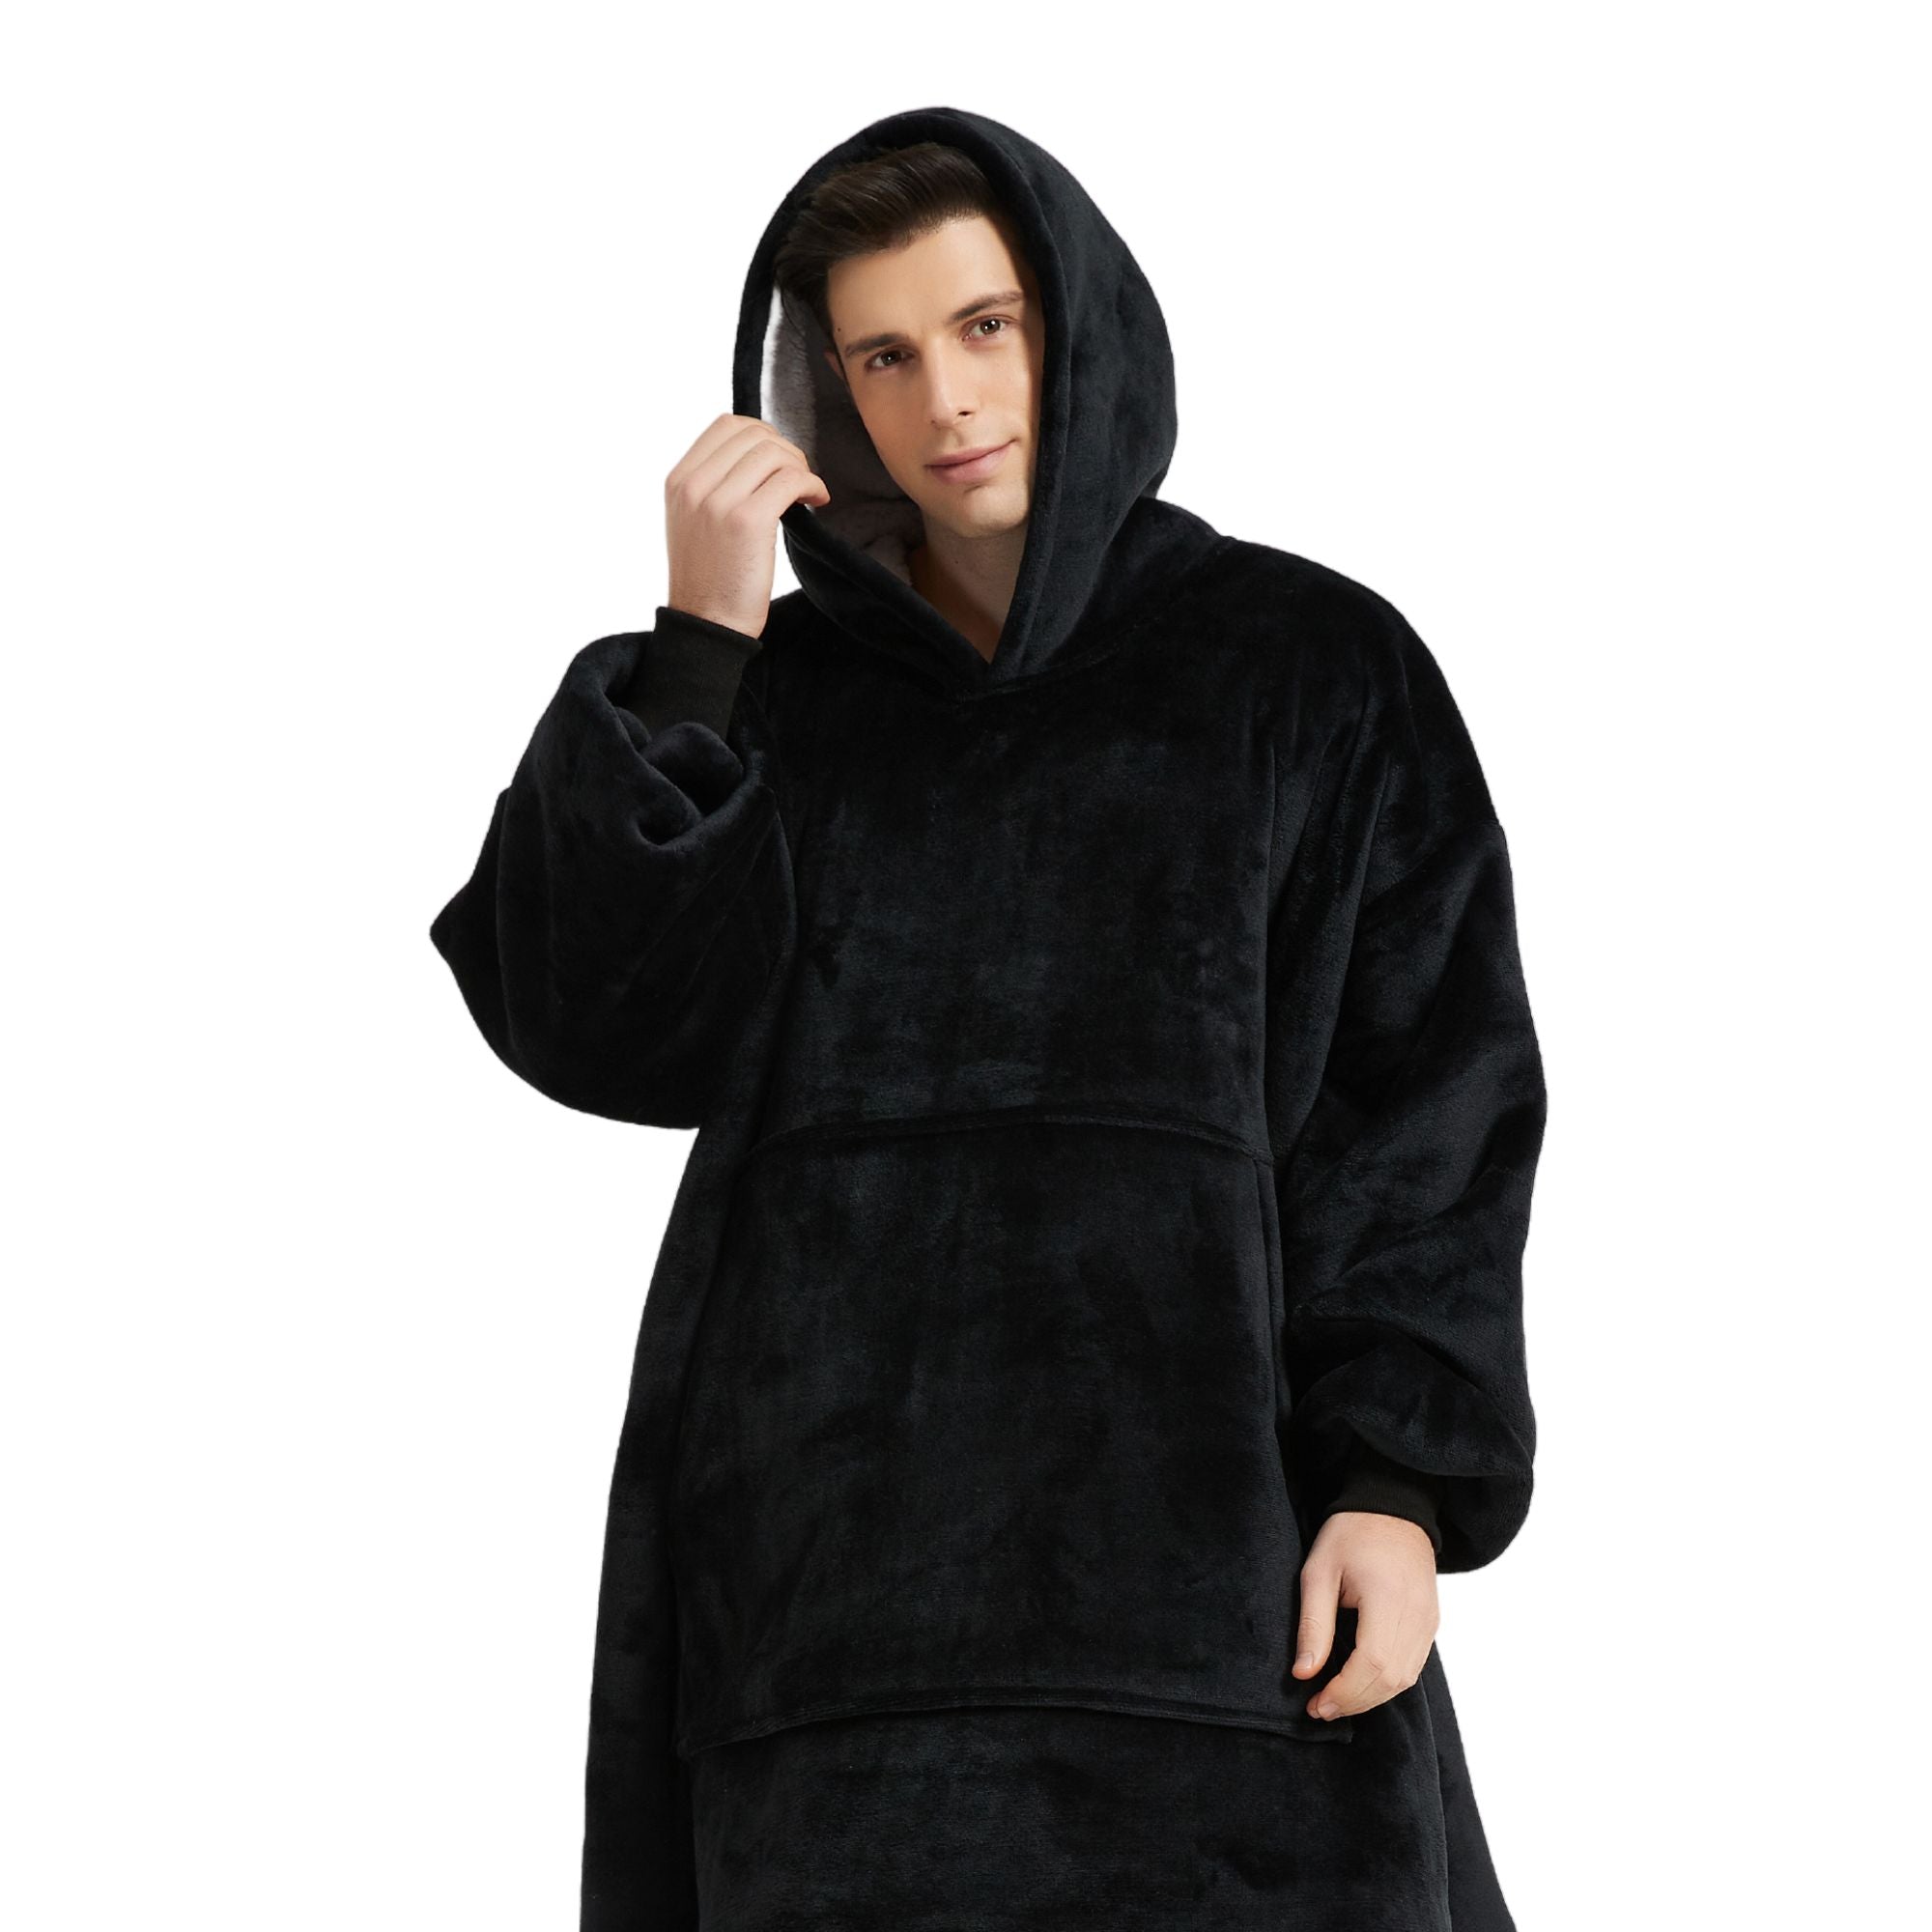 Pull Plaid Homme Noir Sweat Polaire Géant doublure polaire sherpa hiver The Oversized Hoodie